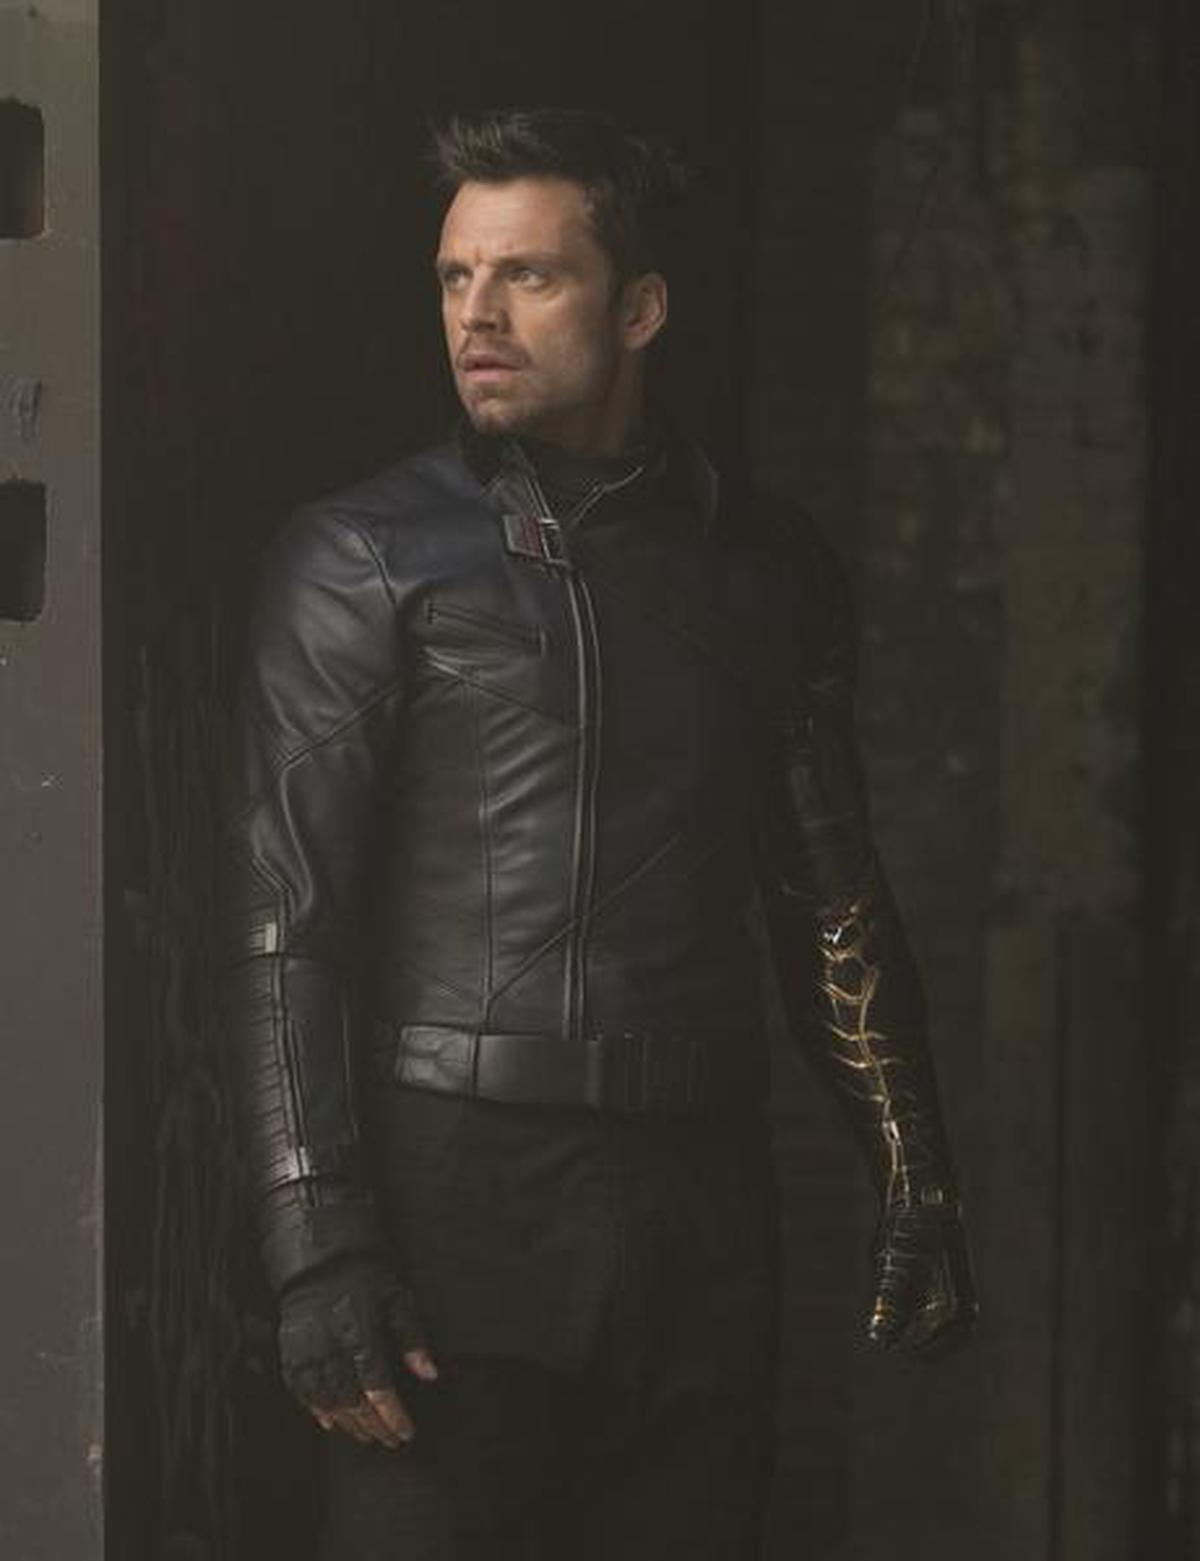 The series will follow Bucky Barnes (Sebastian Stan) deal with the emotional trauma from his past and how he overcomes it, with or without therapy